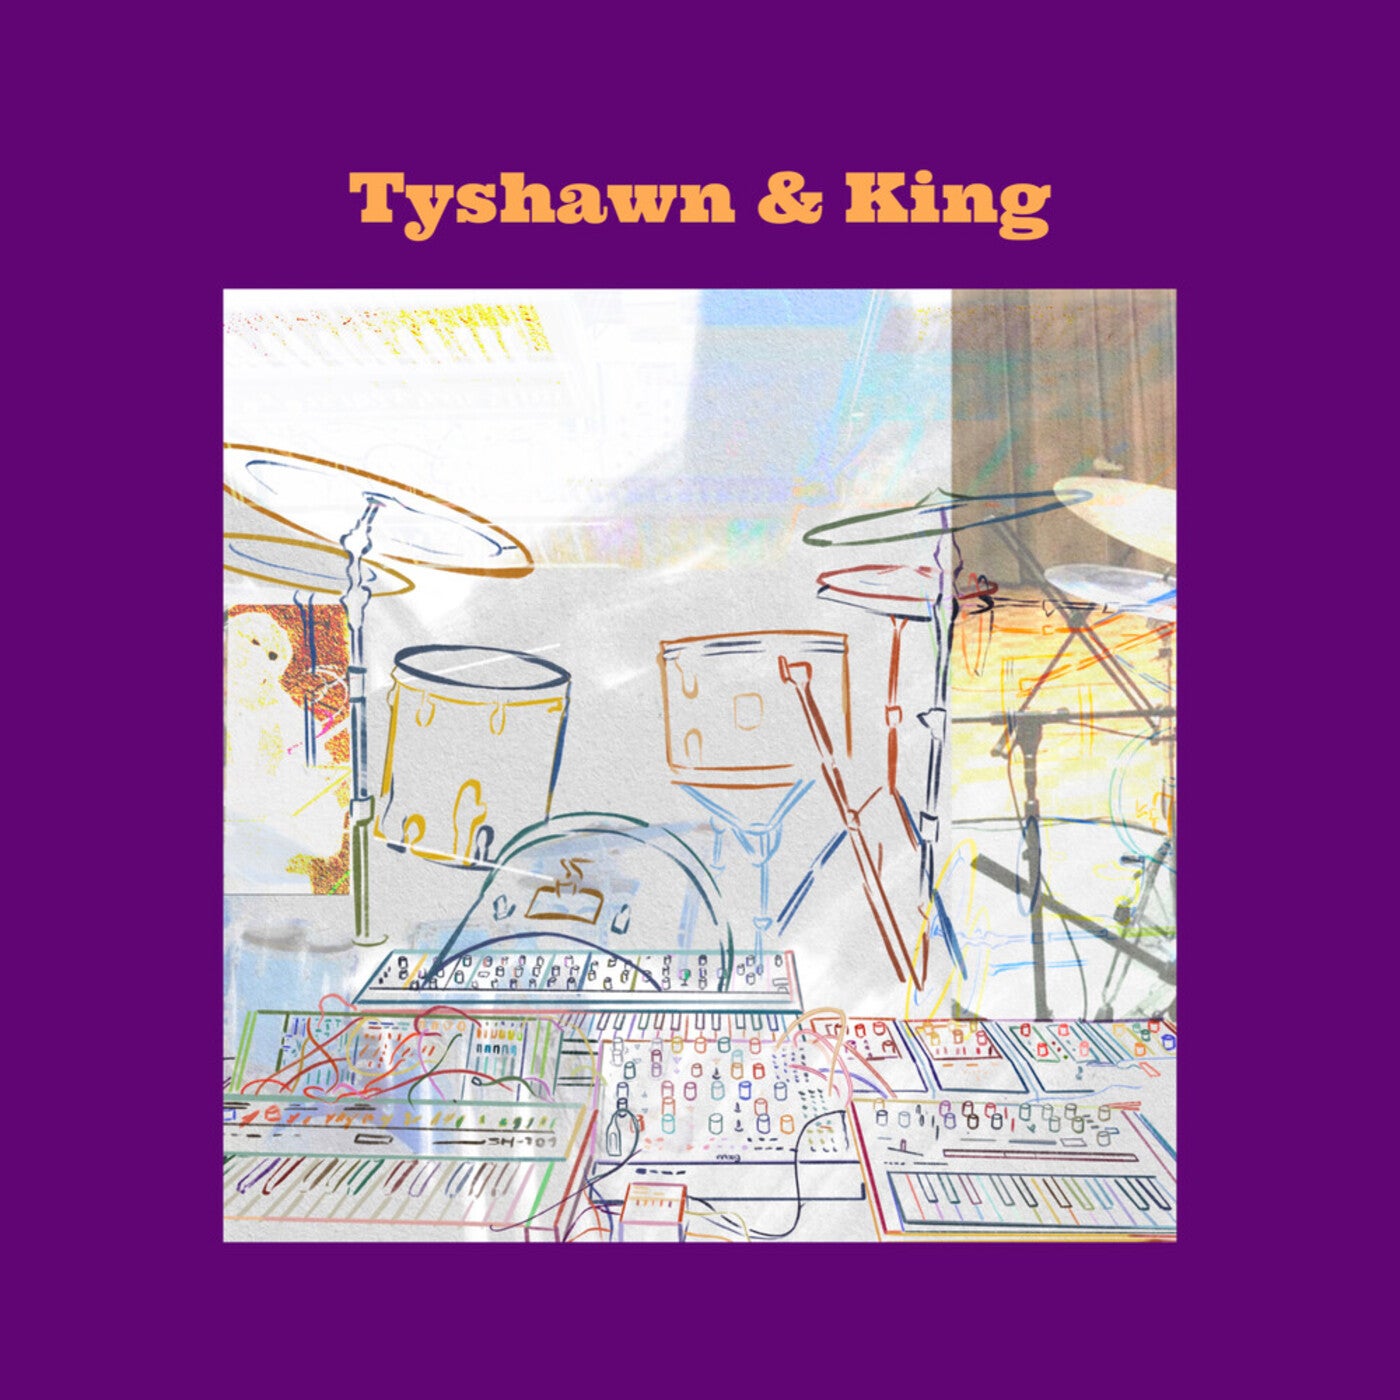 Tyshawn & King from The Buddy System on Beatport